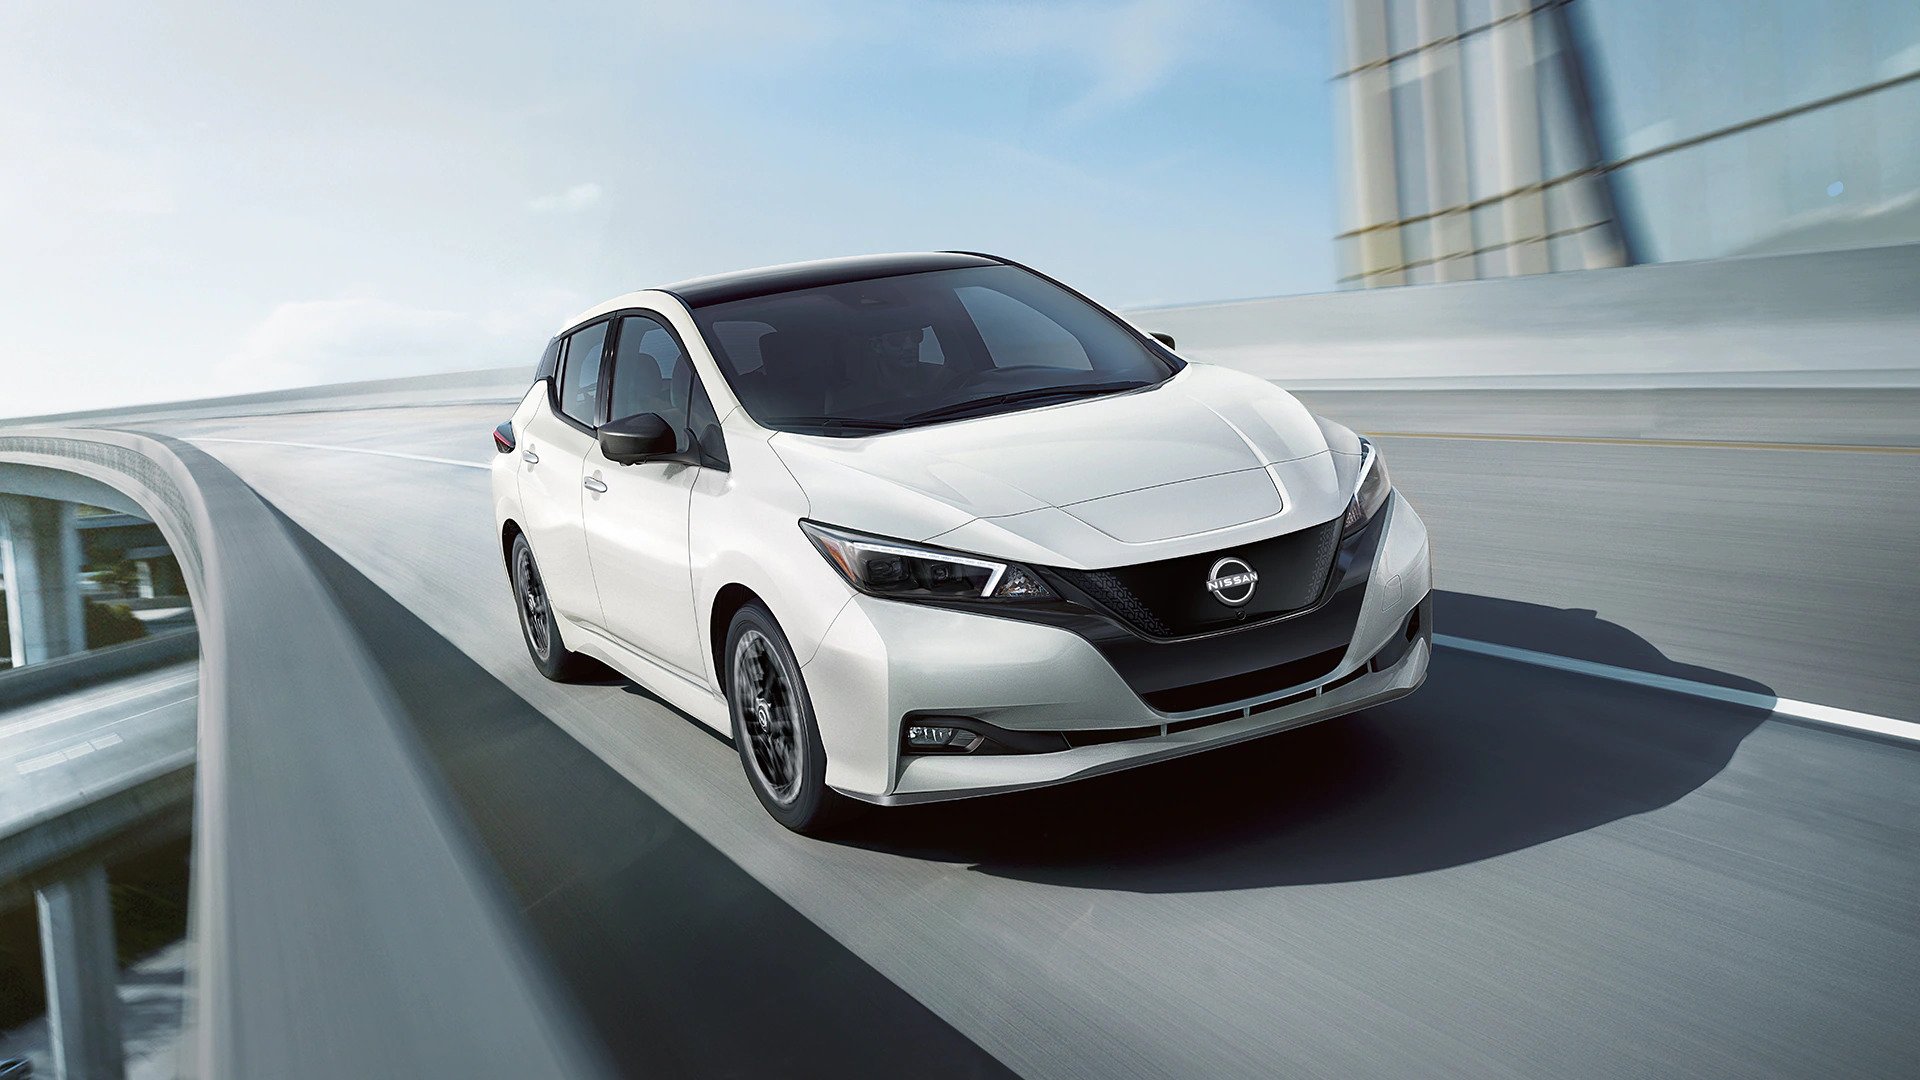 Go further with Nissan's Leaf Range. The new Nissan LEAF has a 60-kWh battery that gives you up to 212 miles on a single charge.